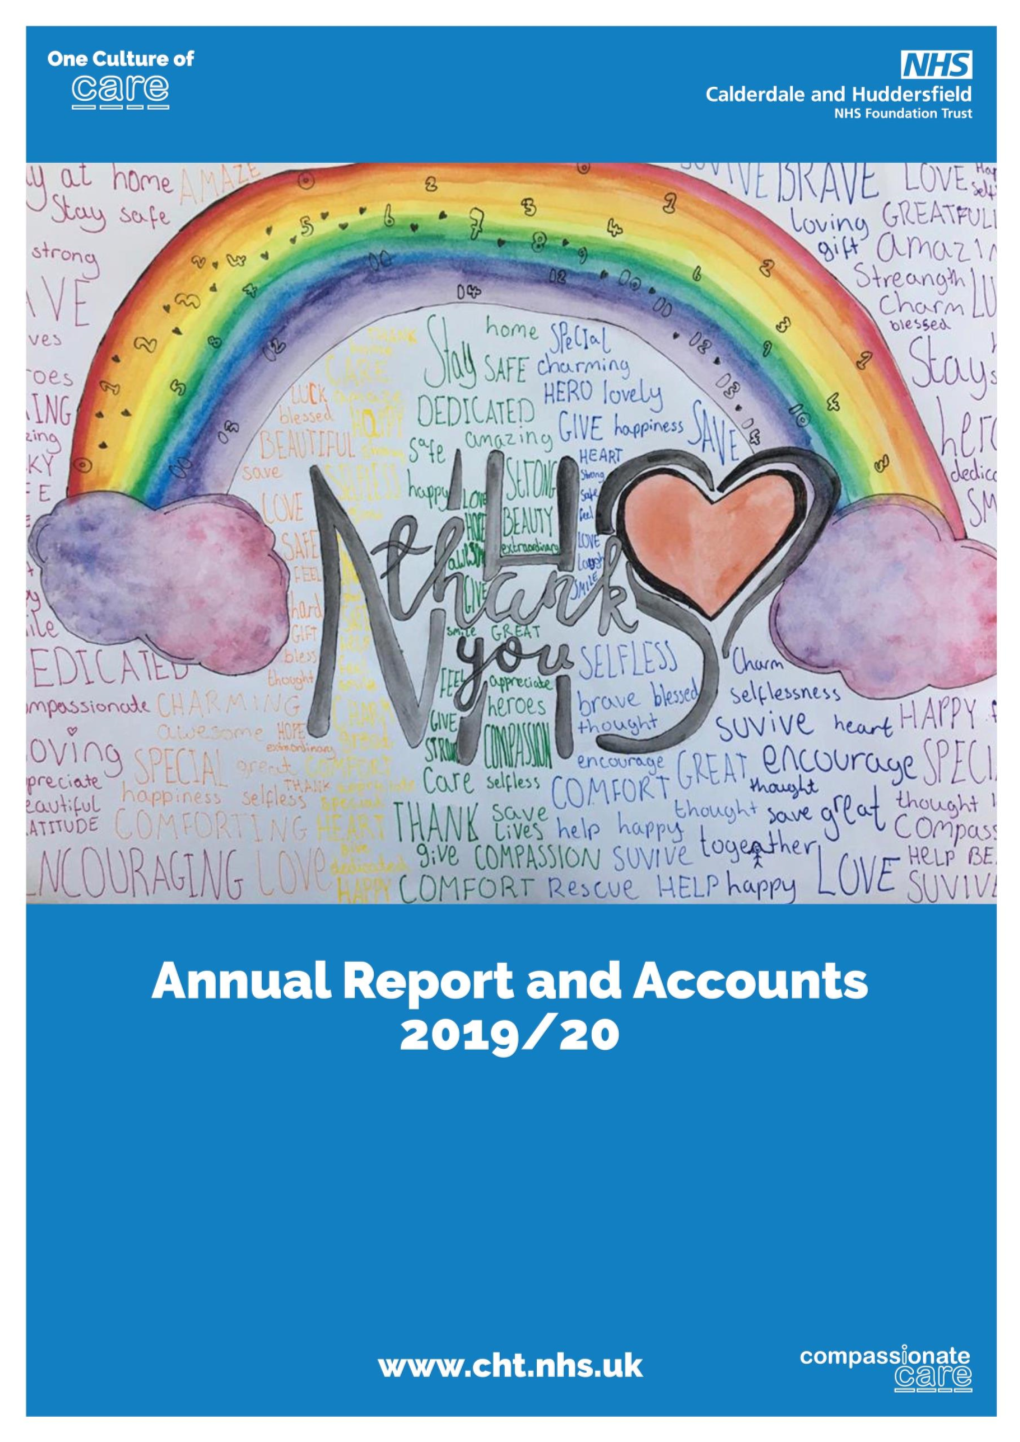 Full Annual Report and Accounts 2019/20